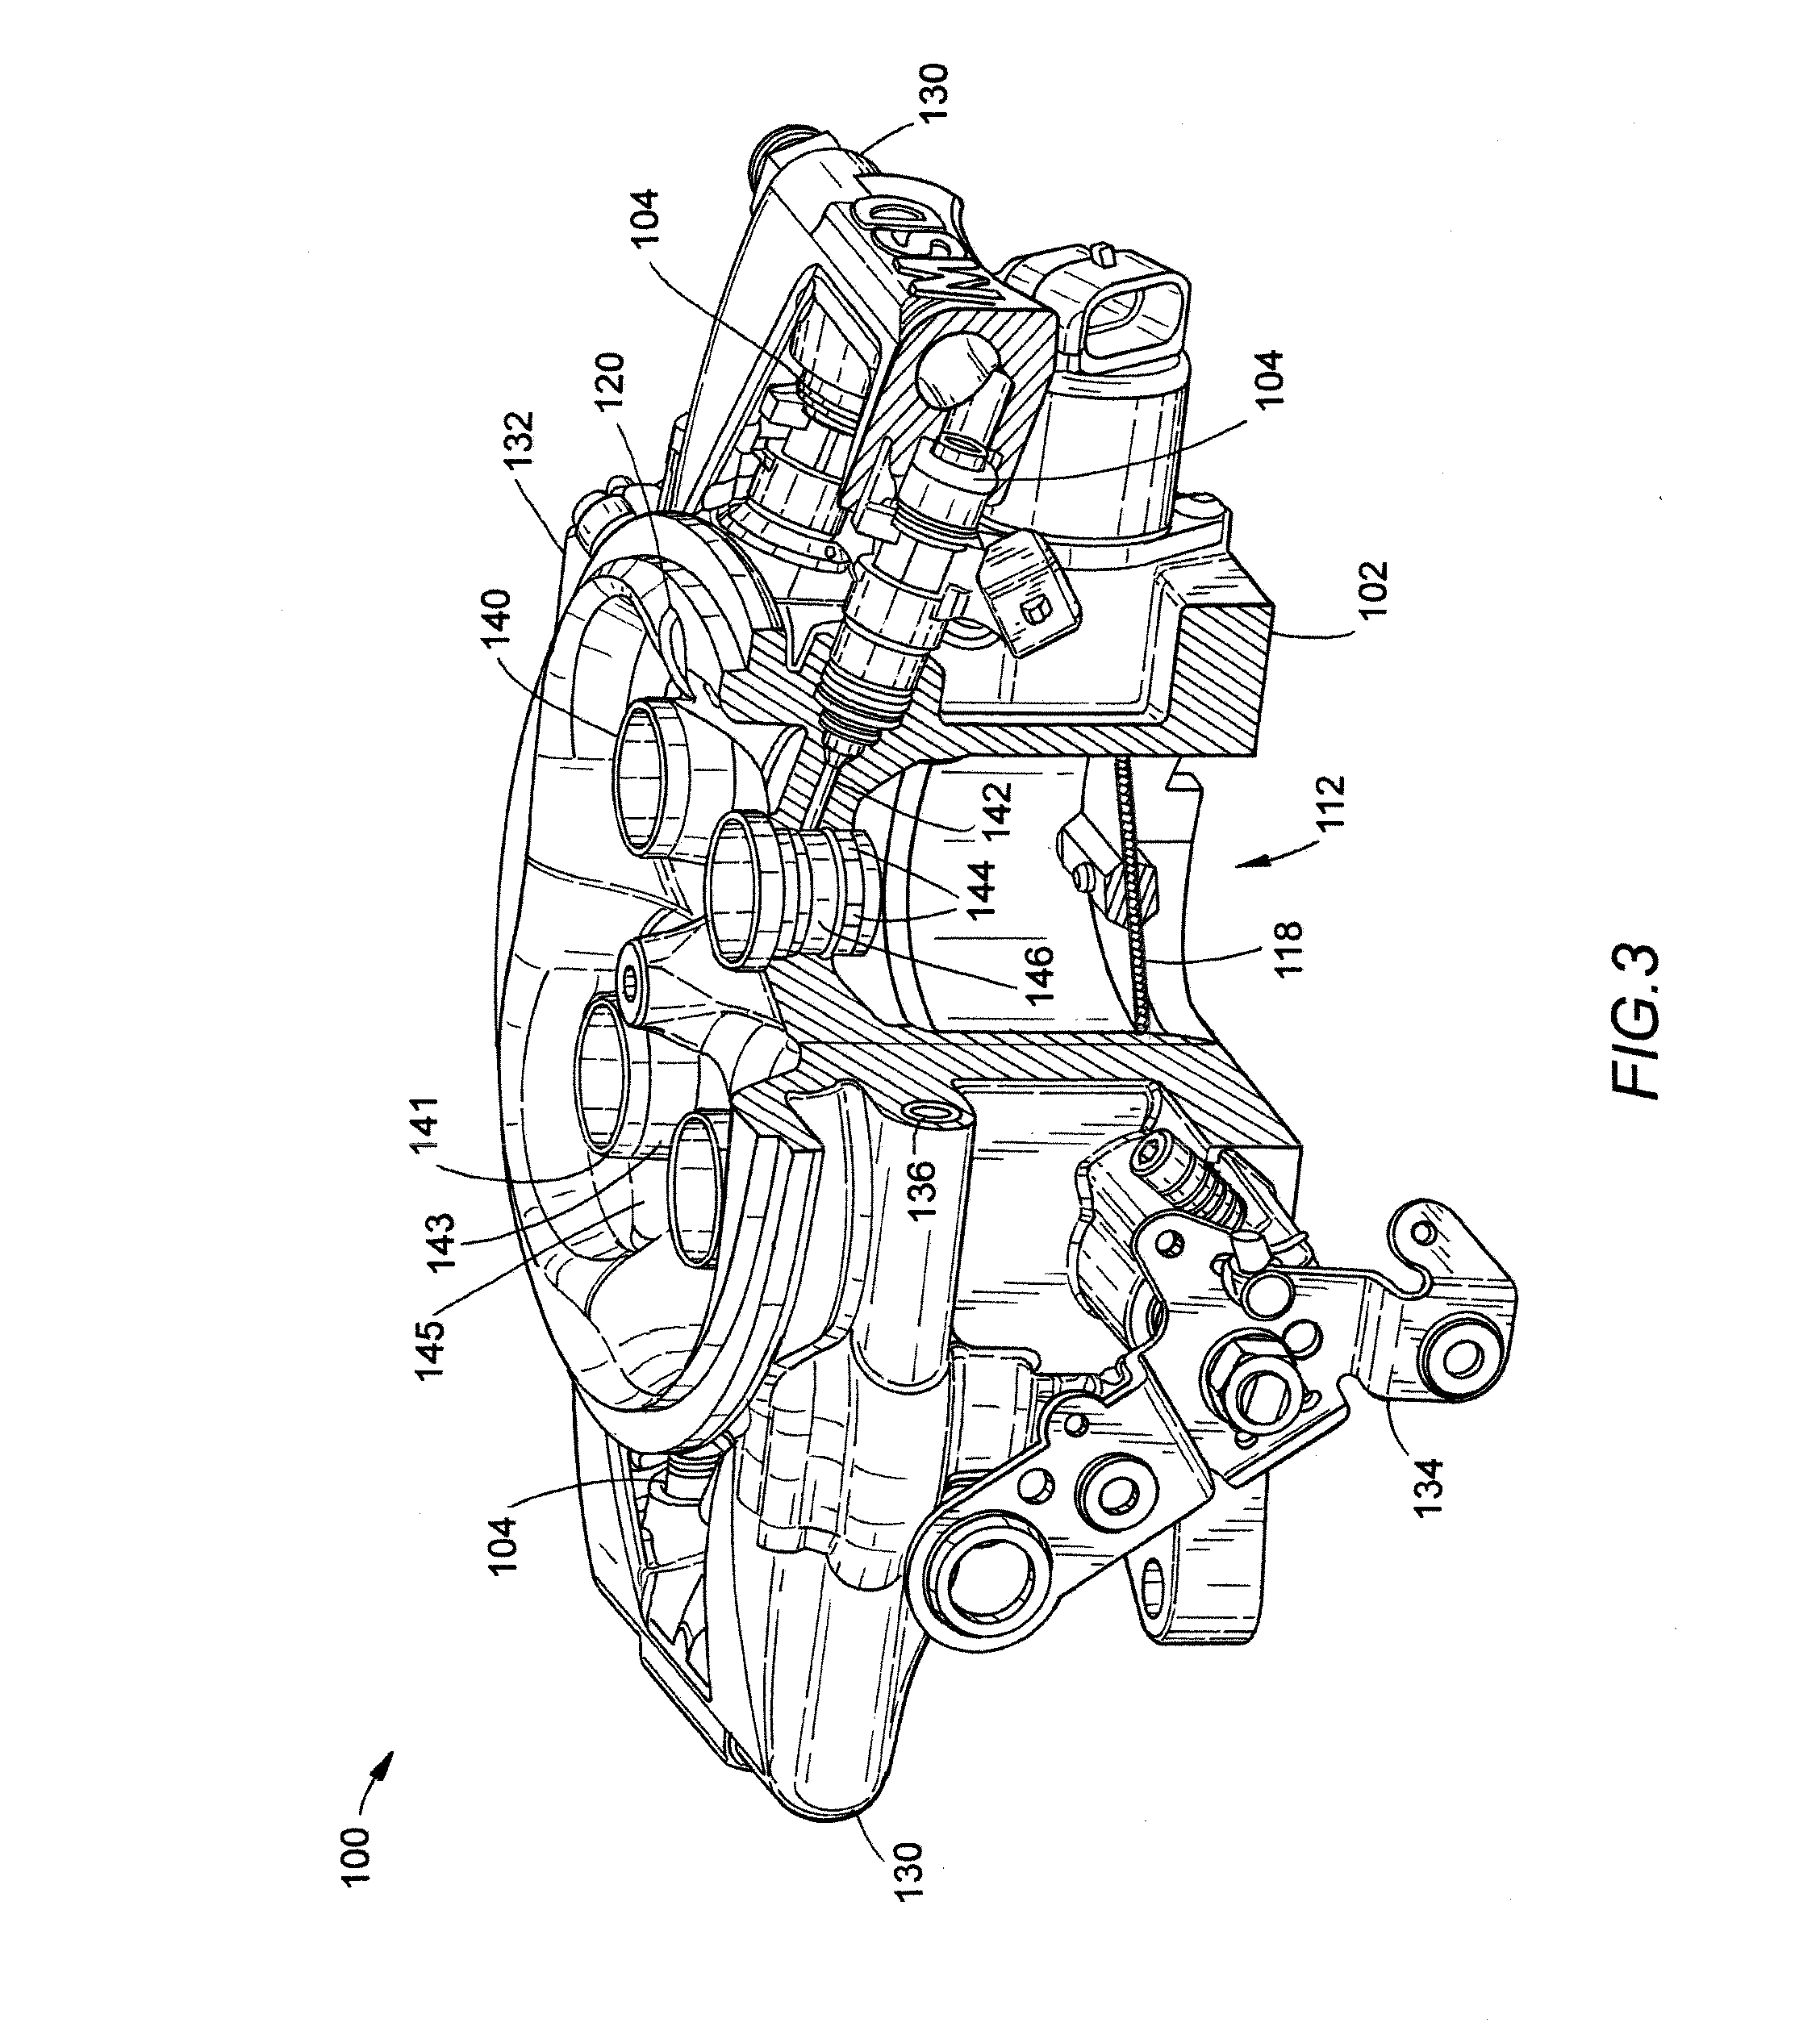 Throttle body fuel injection system with improved fuel distribution